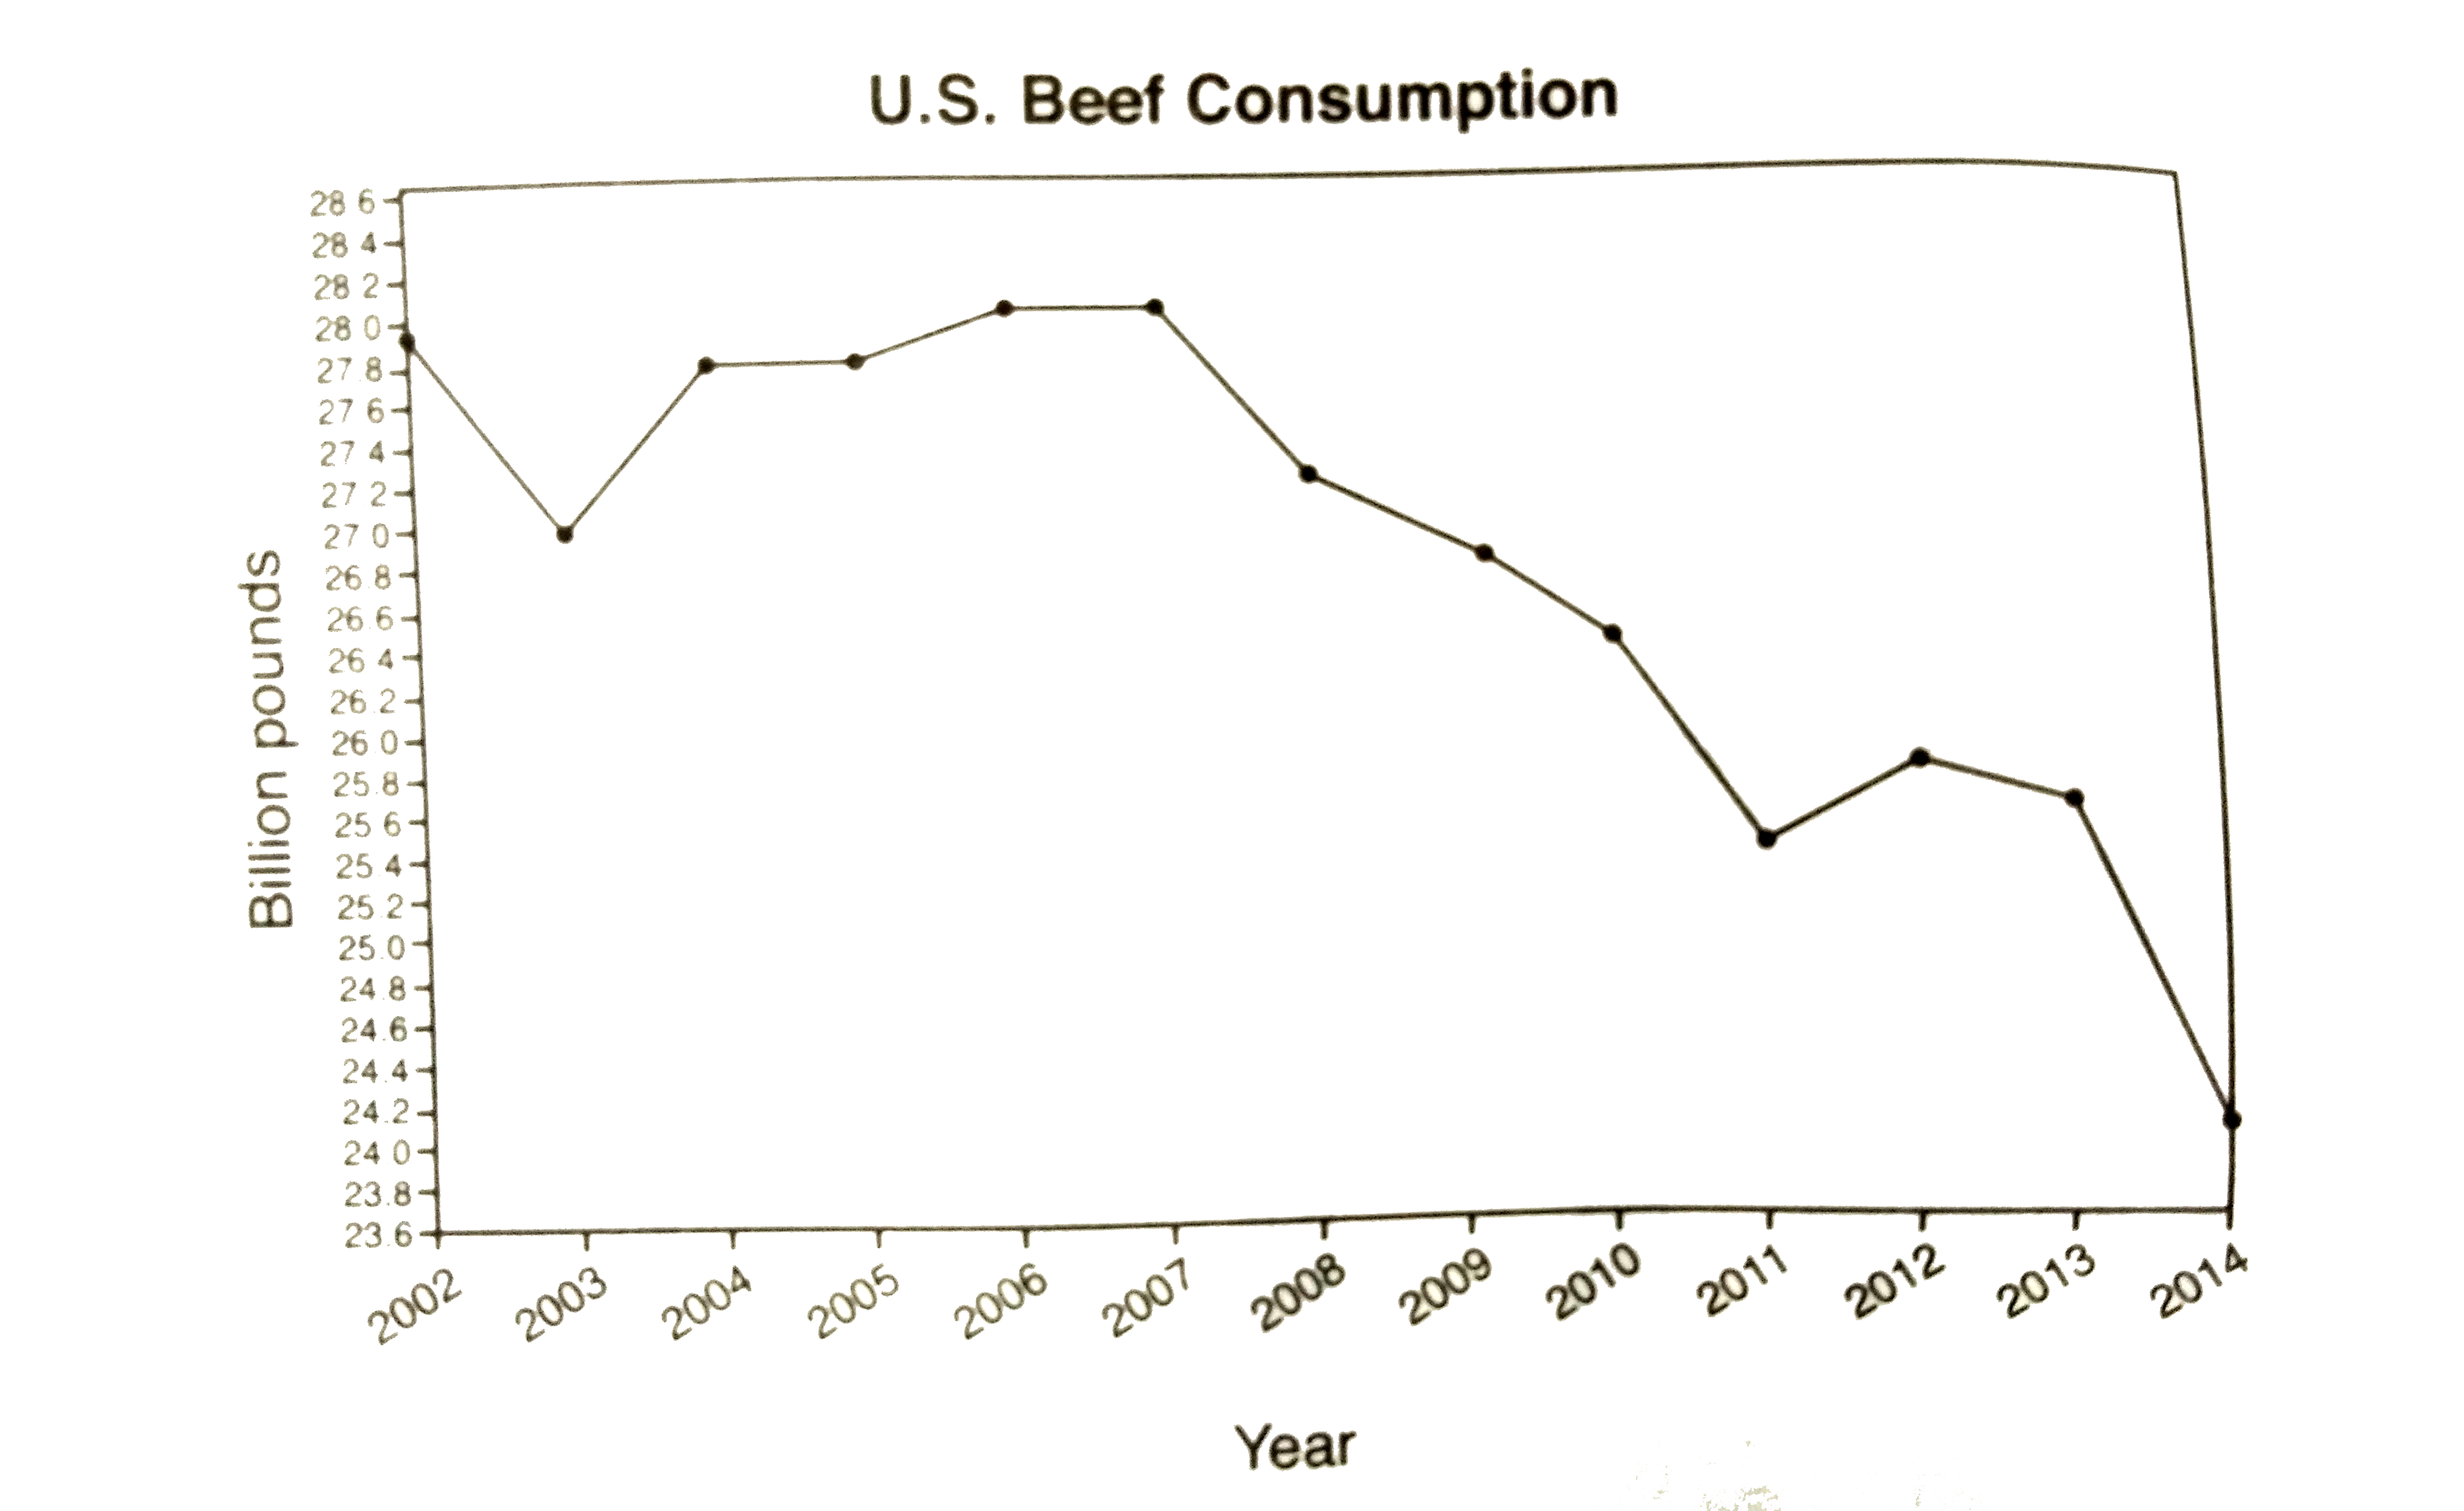 Based on the information in the graph, what can be said U.S consuption of beef between 2006 and 2007?